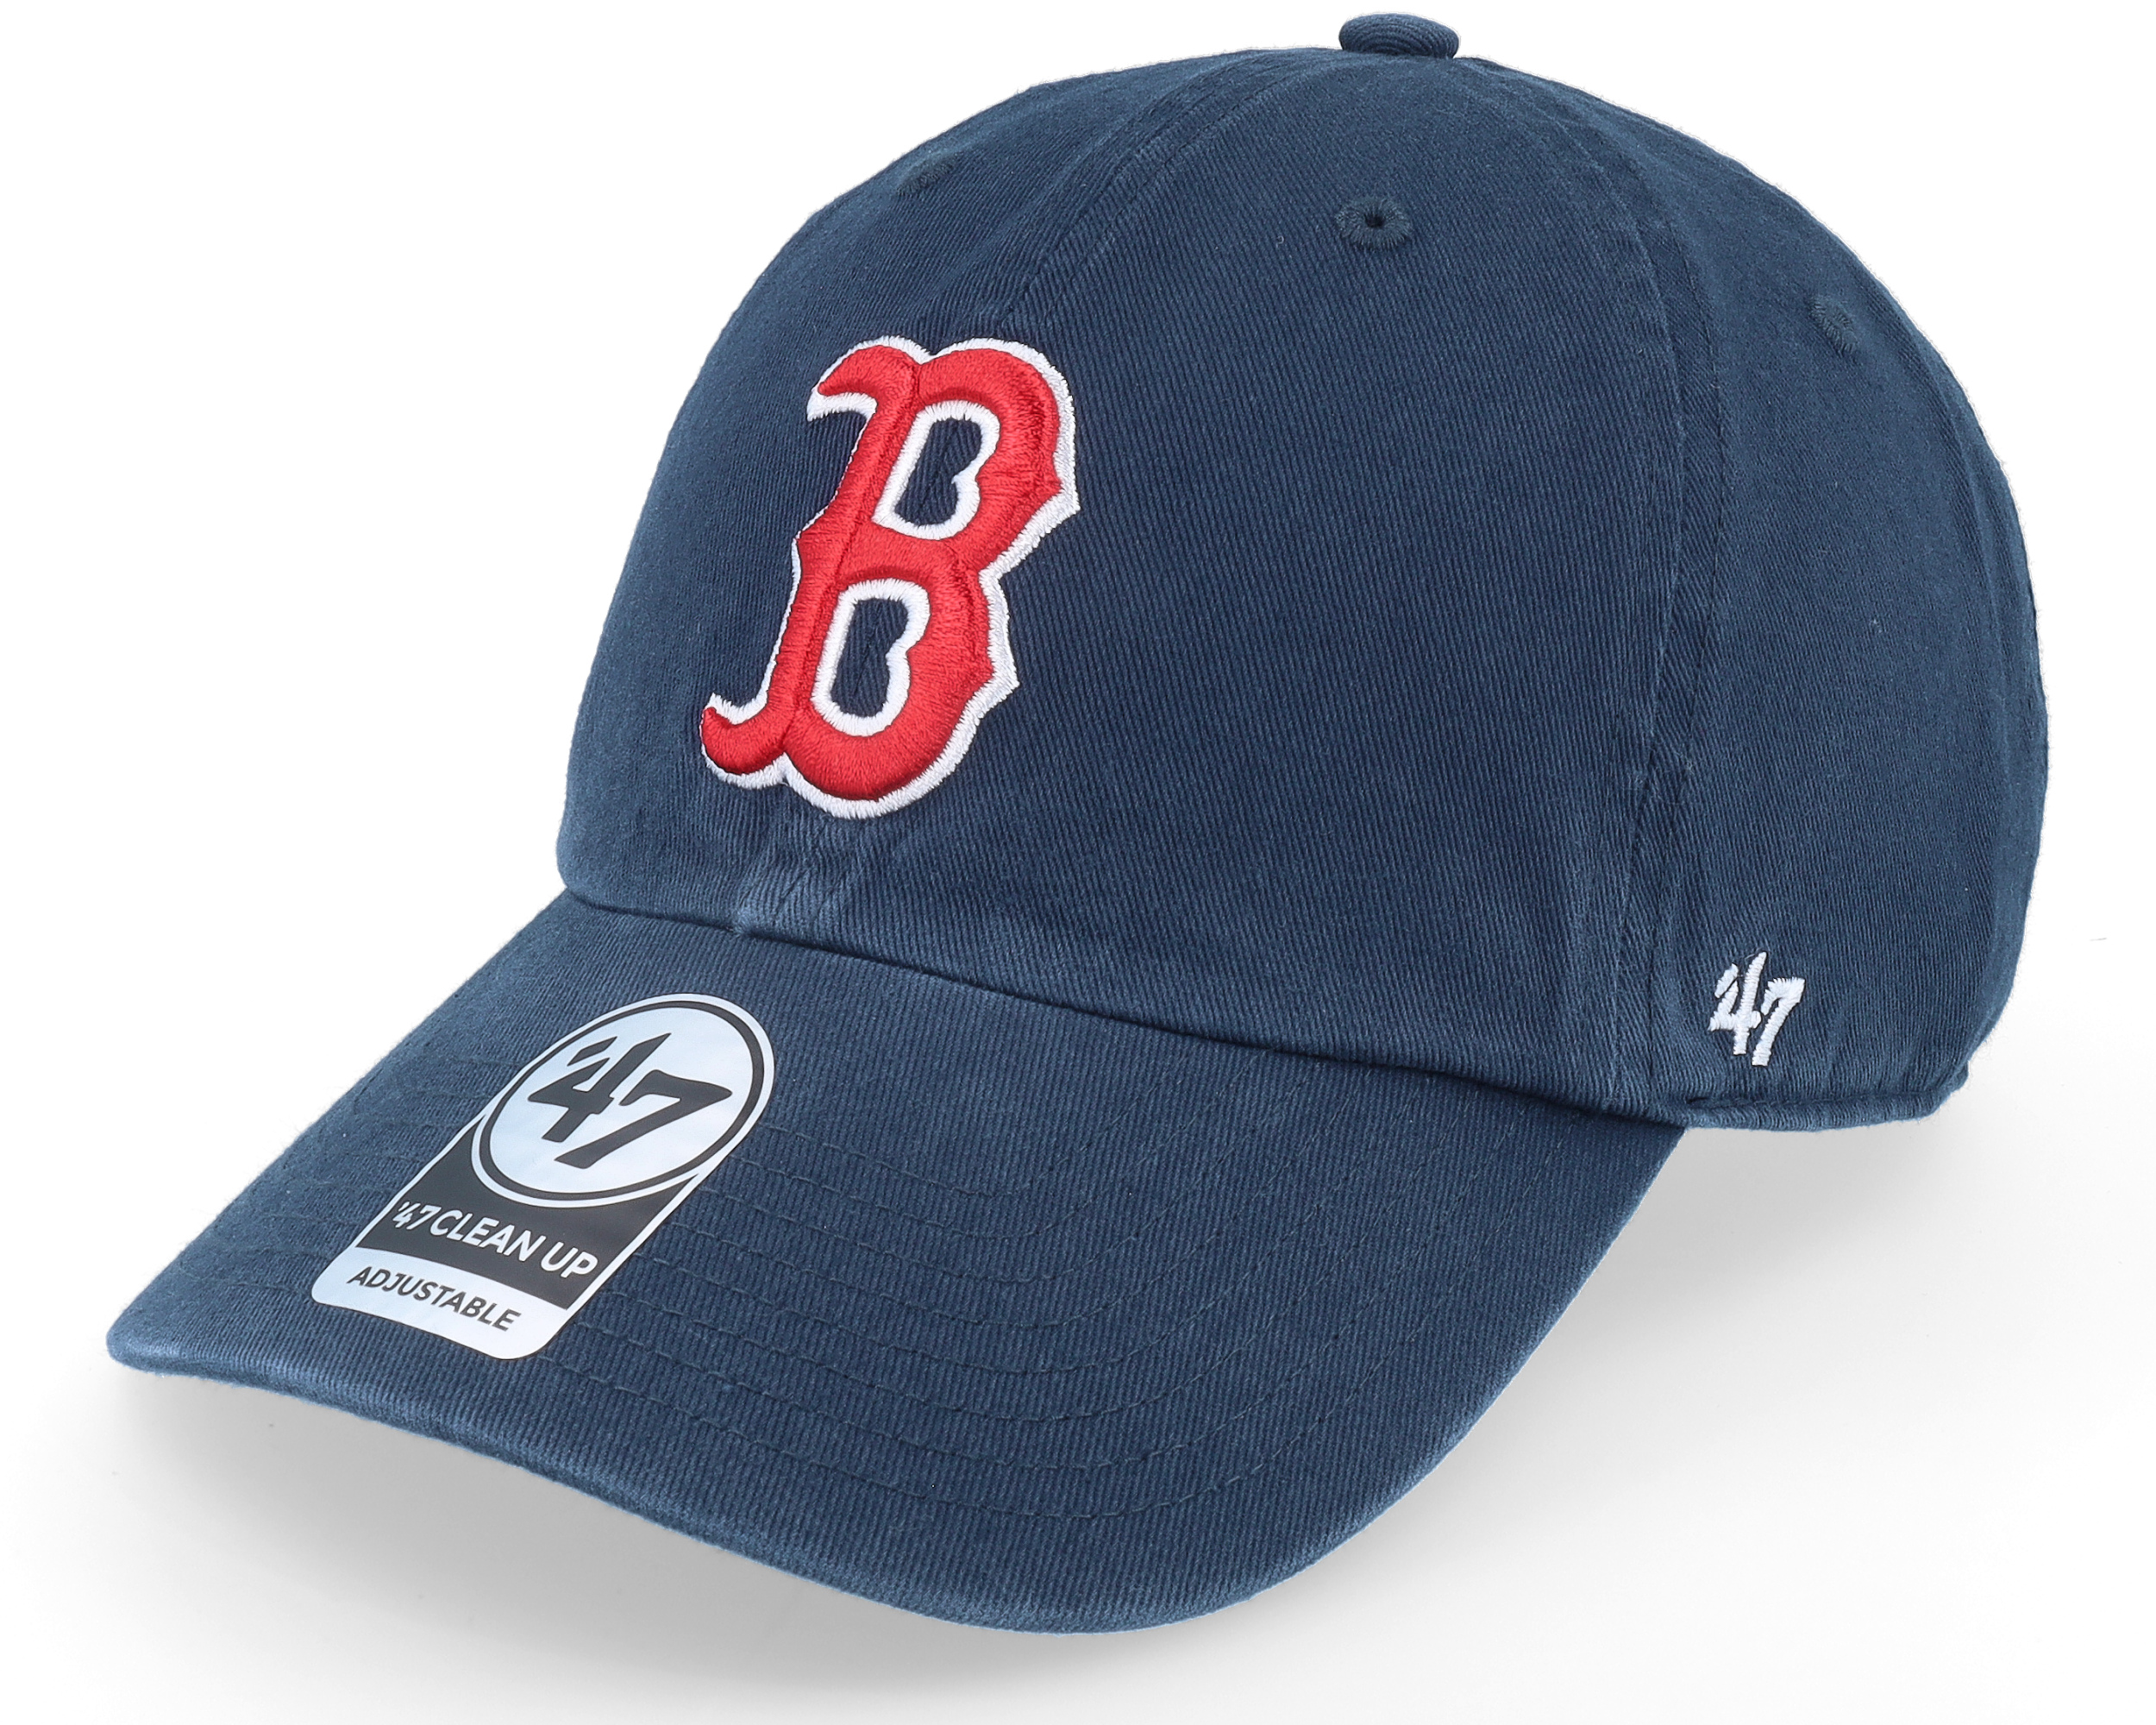 Boston Red Sox '47 Women's Clean Up Adjustable Hat - Pink